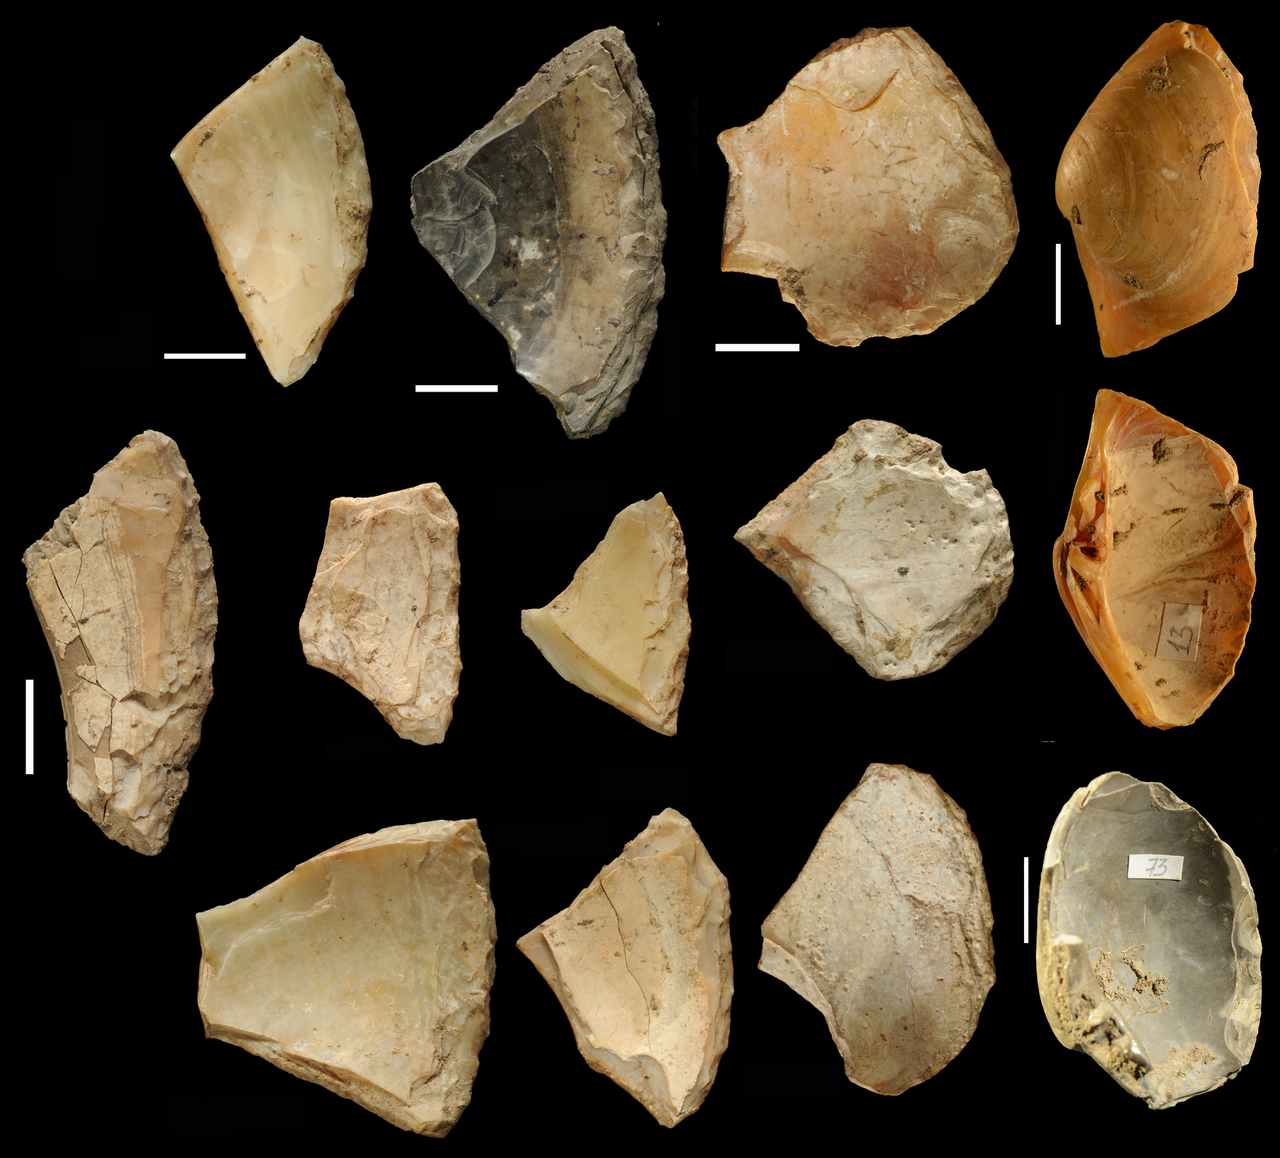 Shell game: Neanderthals likely found these cutting tools beneath the waves.